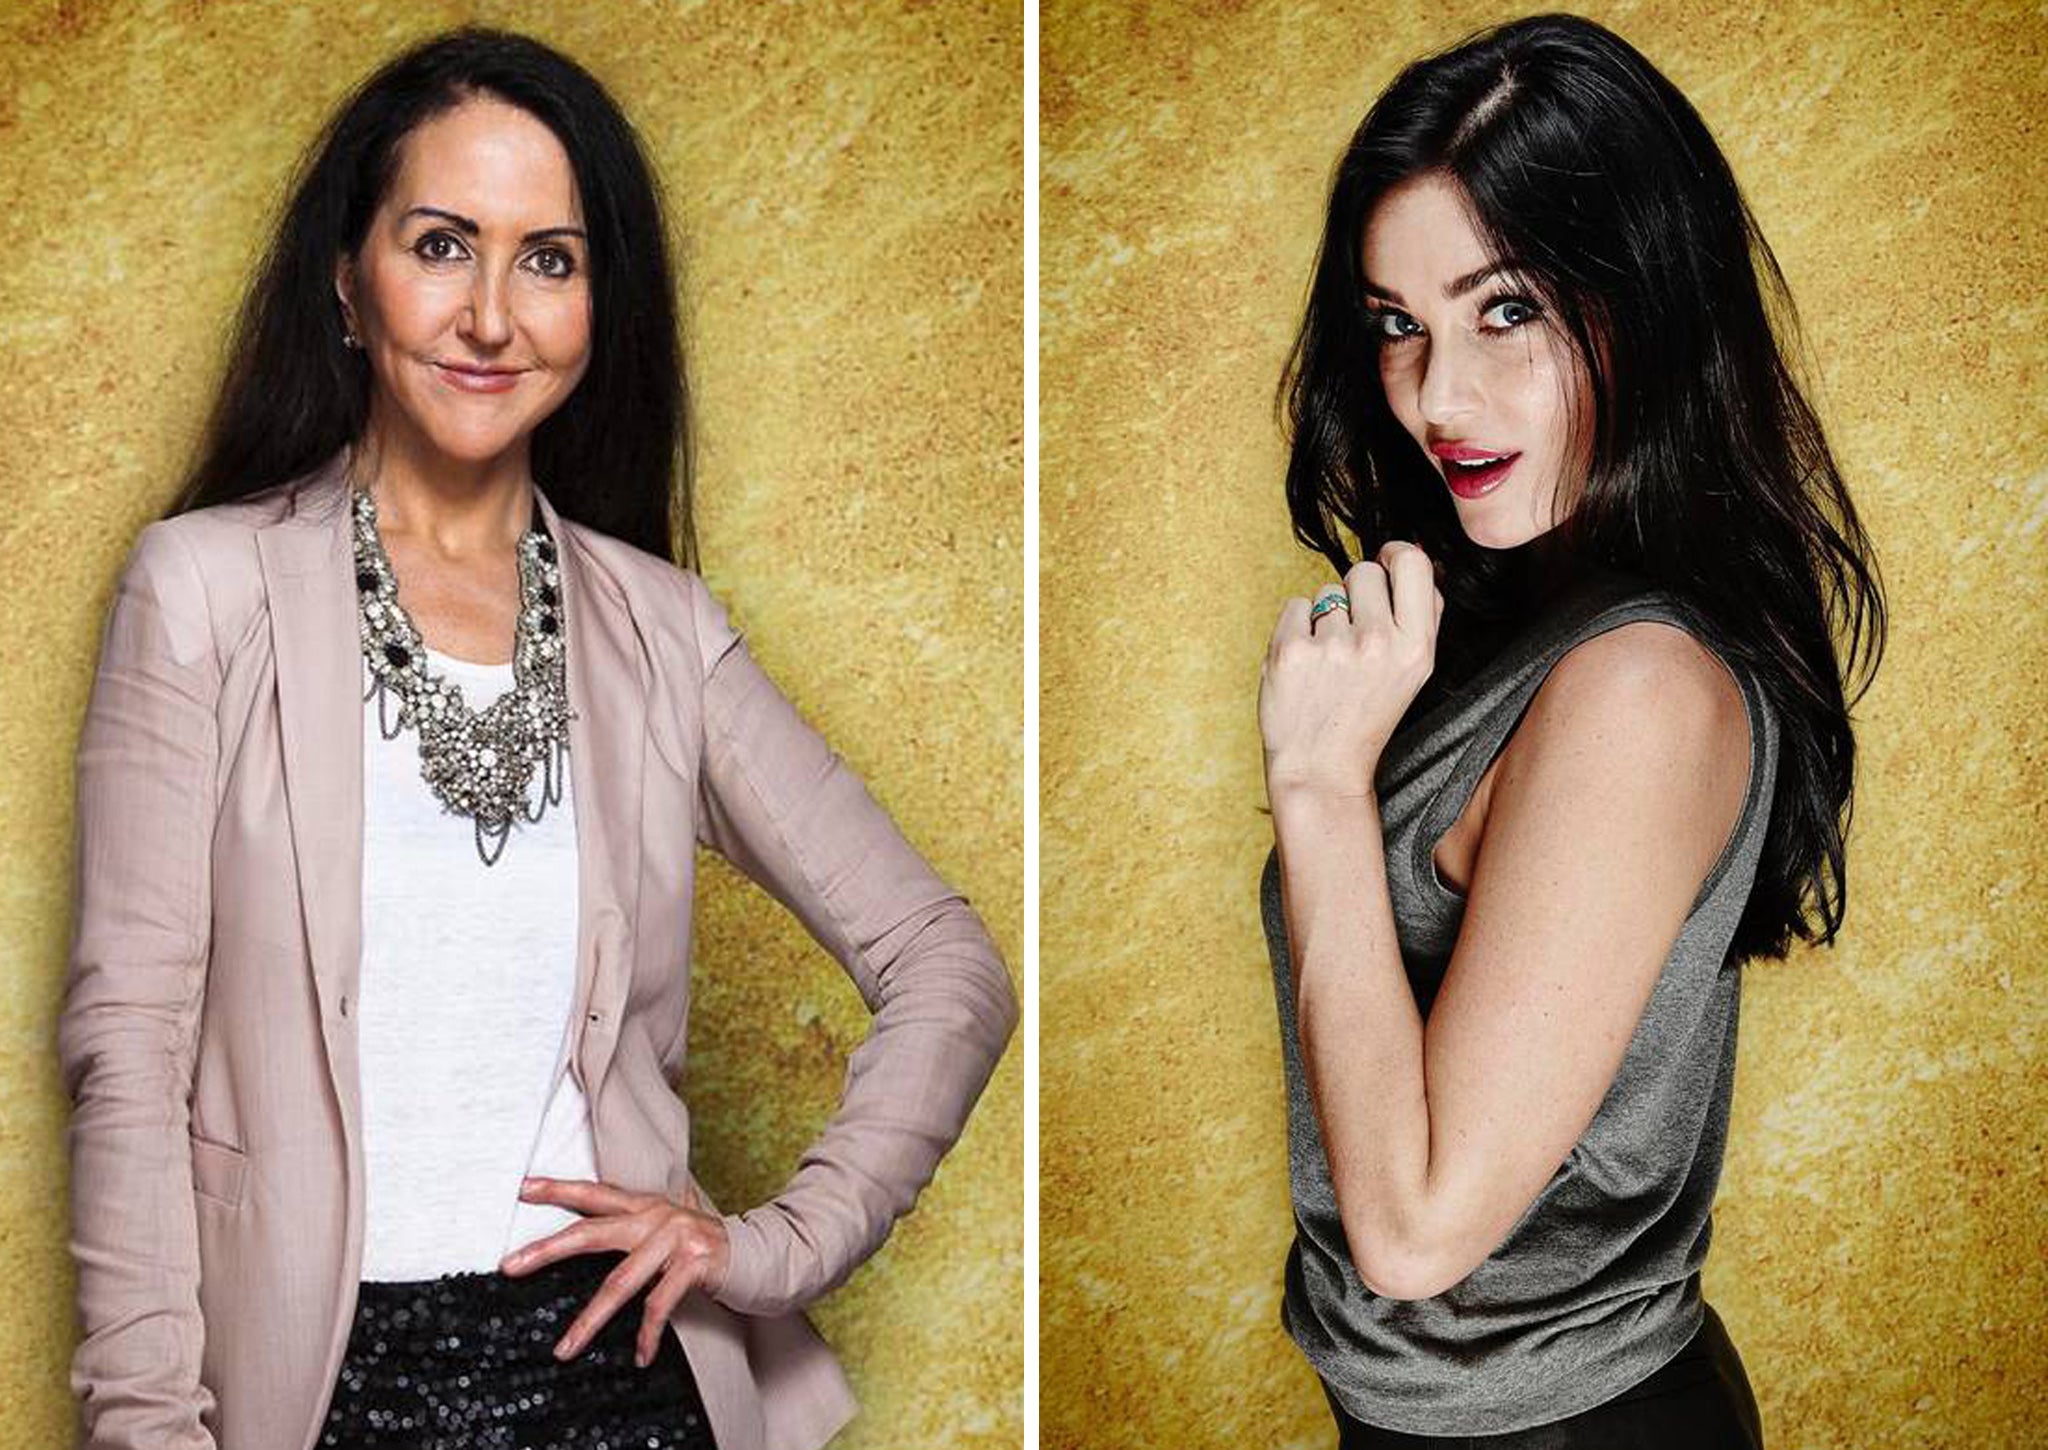 Liz Jones and Jasmine Waltz clashed on Celebrity Big Brother after Jones said the model's good looks made her want to 'kill herself'